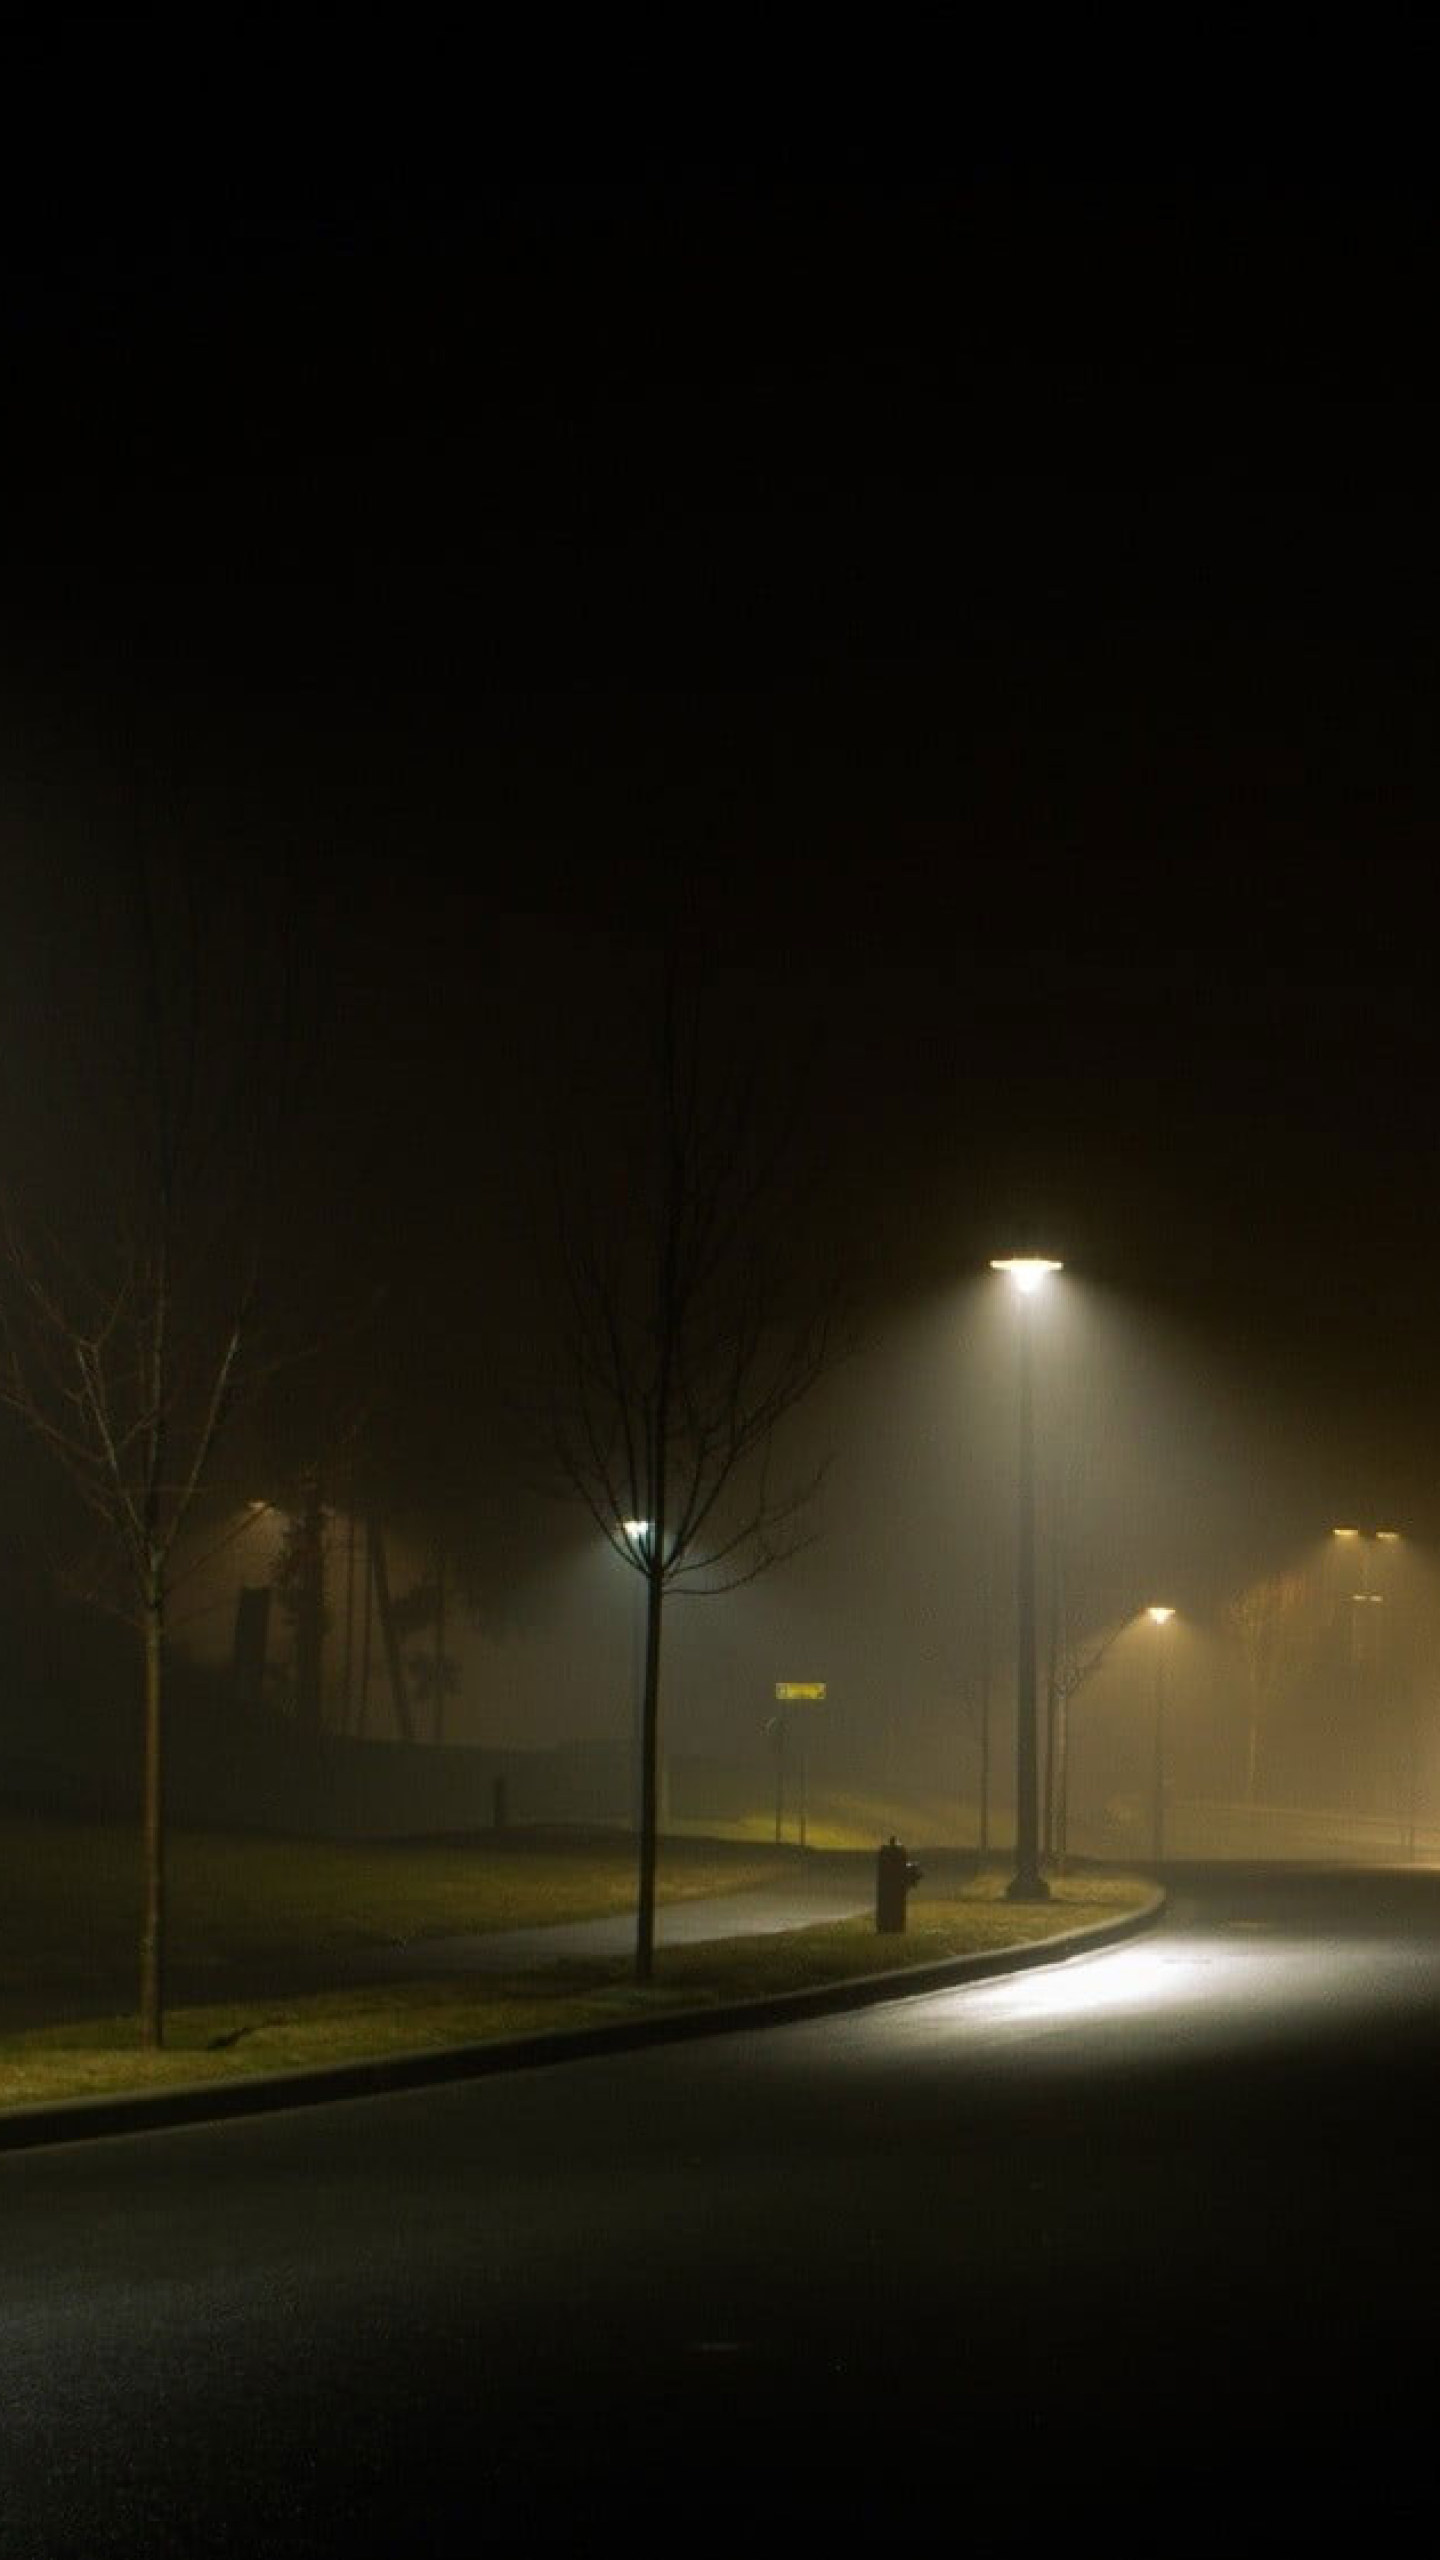 Street Lights Photos Download The BEST Free Street Lights Stock Photos   HD Images